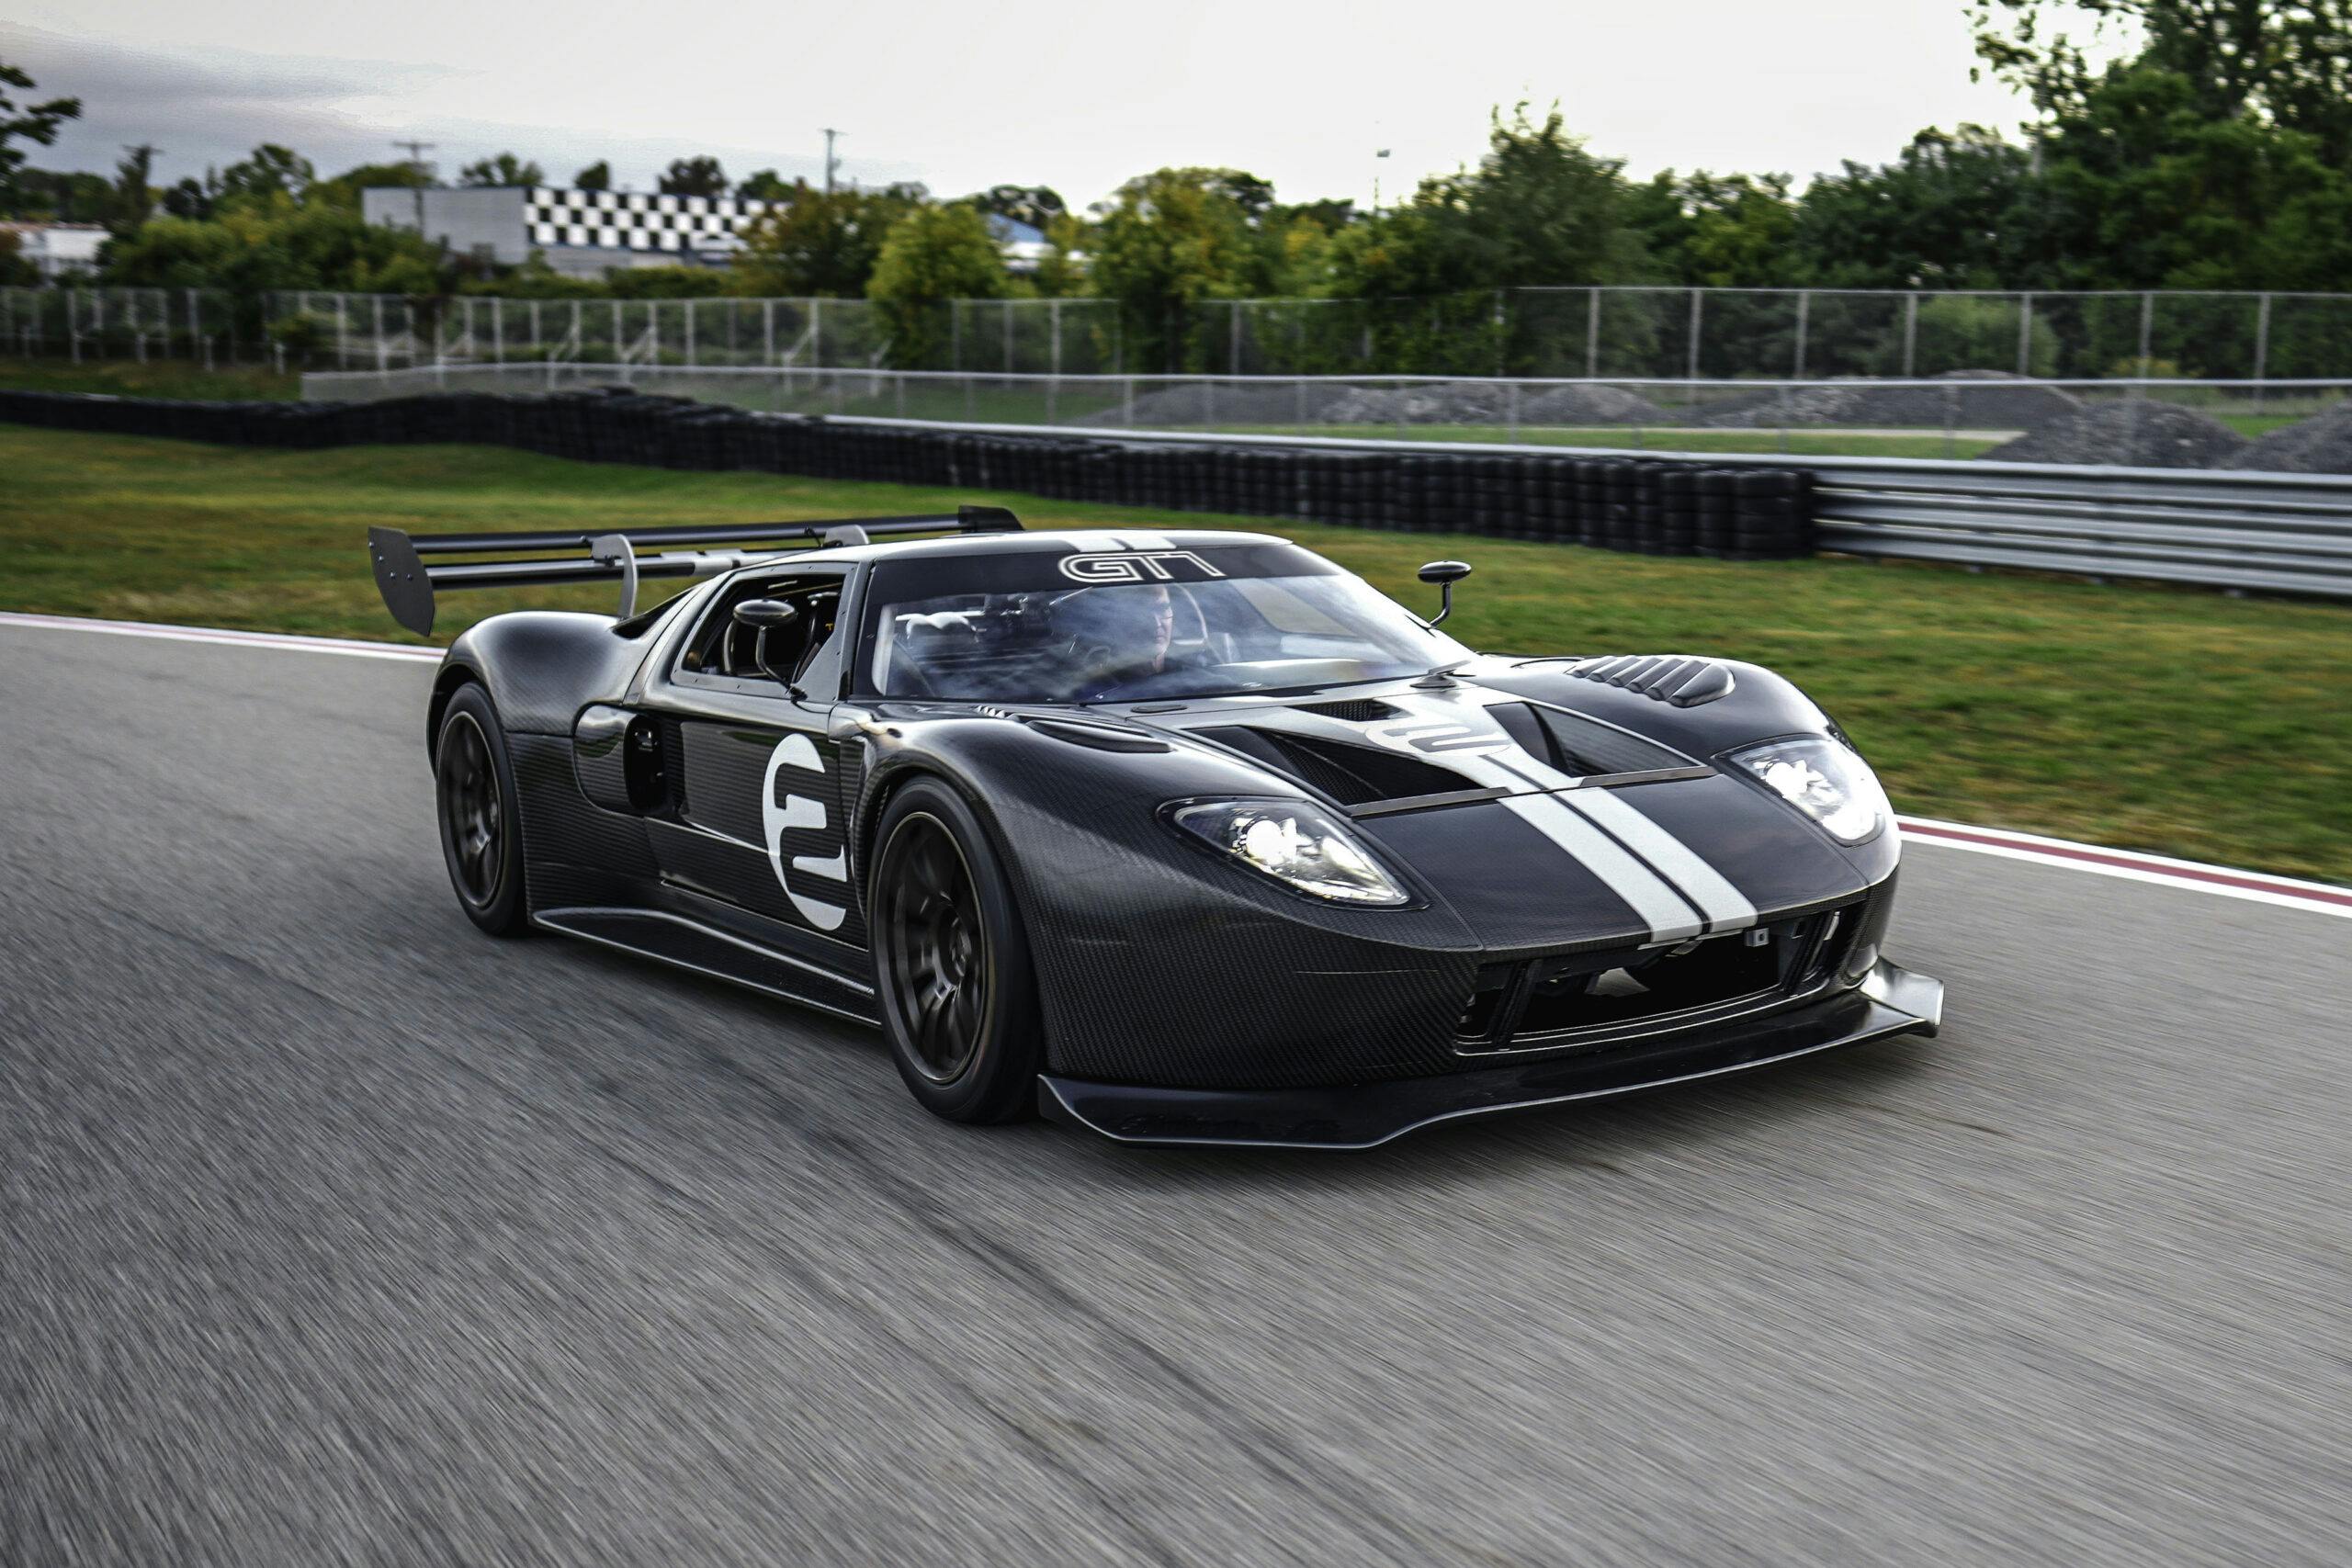 Michigan-based GT1 to convert 30 Ford GT chassis into 1000+ hp